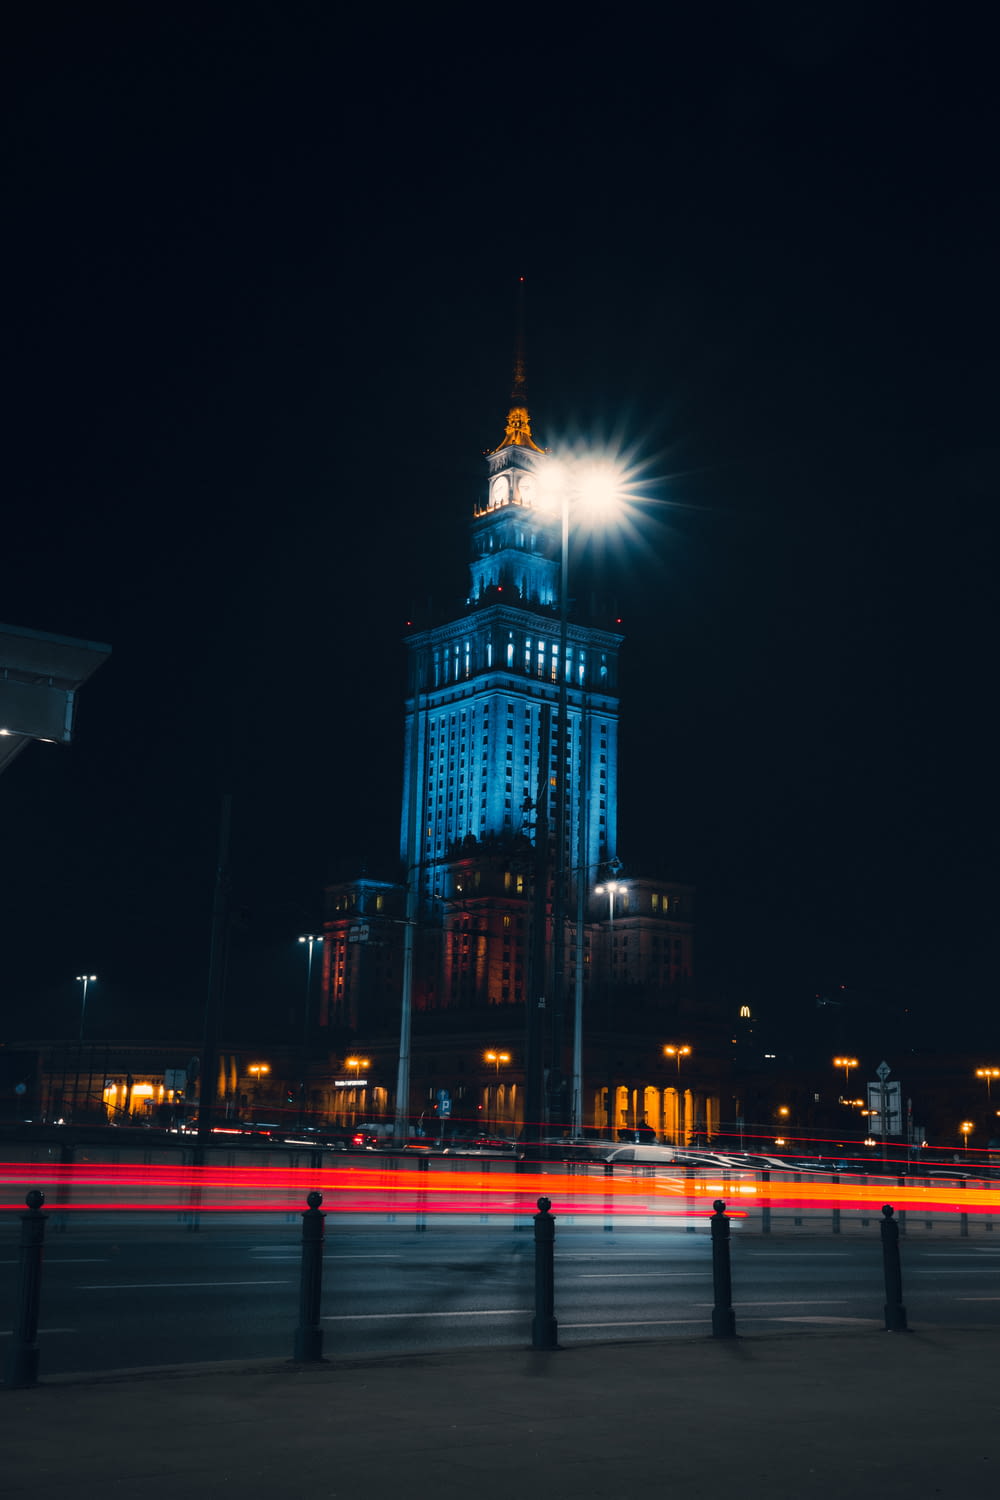 a tall building with a clock tower lit up at night